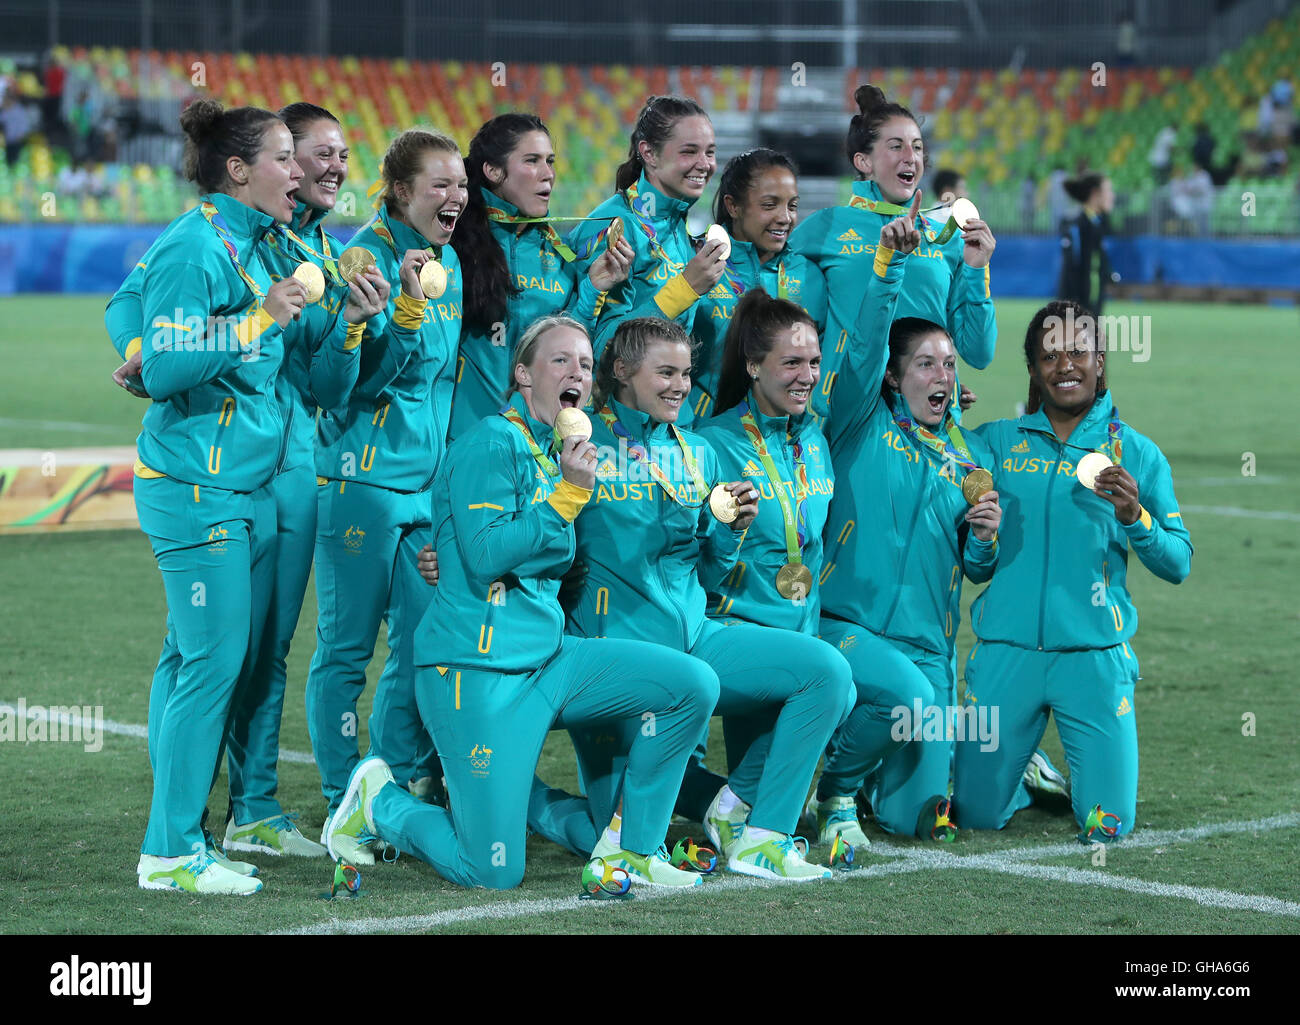 The Australian team celebrate with their gold medals after winning the Rugby Sevens at the Deodoro Stadium on the third day of the Rio Olympic Games, Brazil. Stock Photo